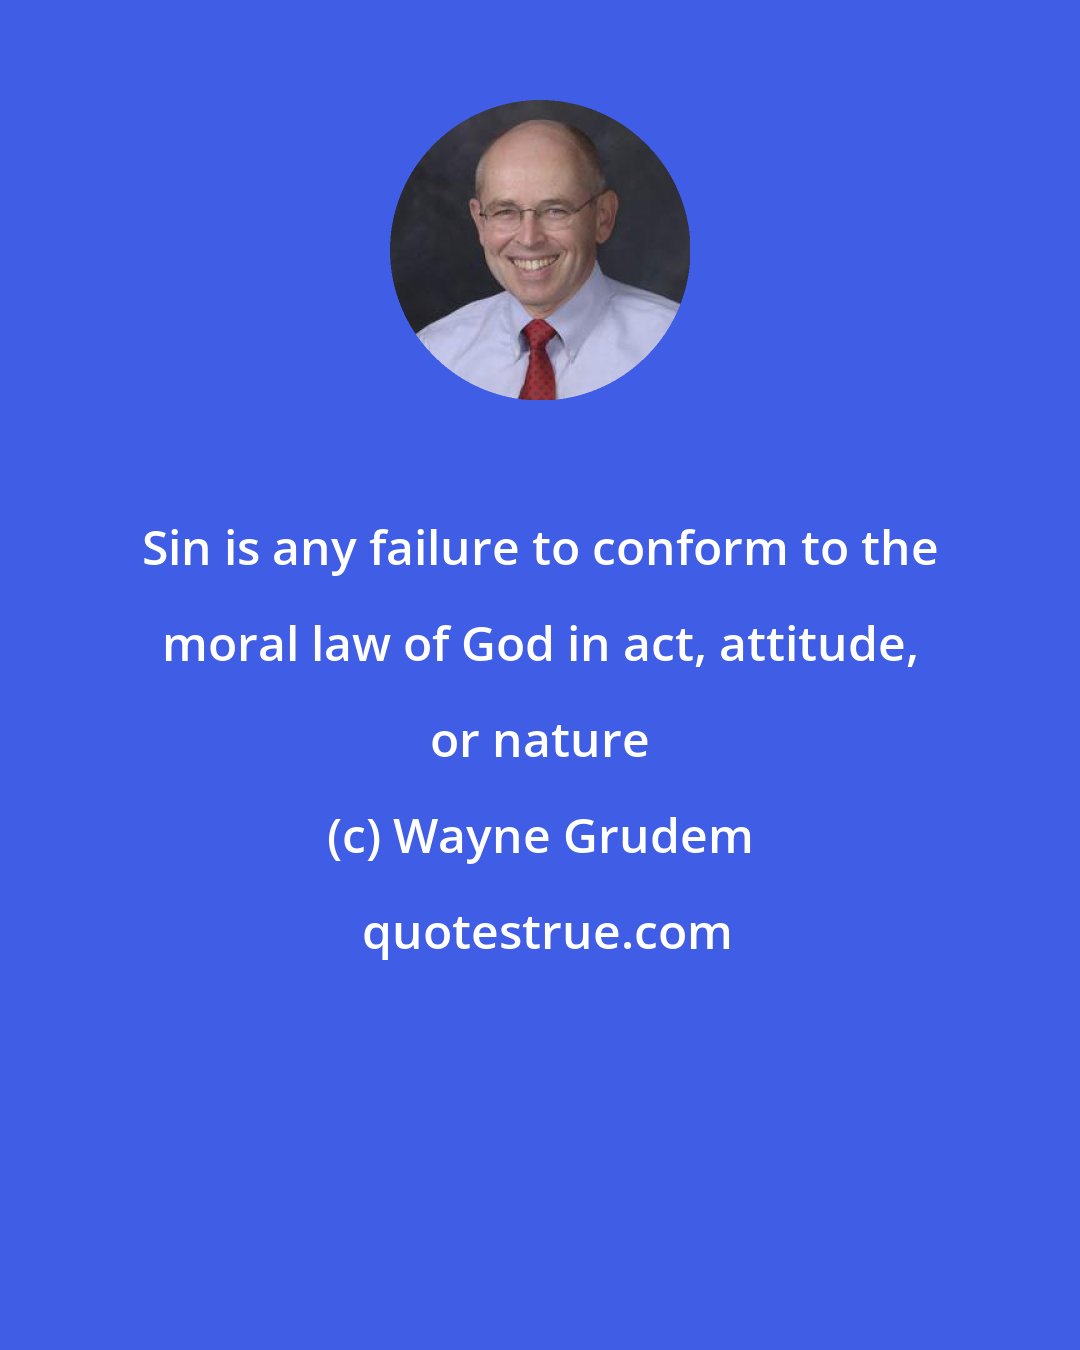 Wayne Grudem: Sin is any failure to conform to the moral law of God in act, attitude, or nature